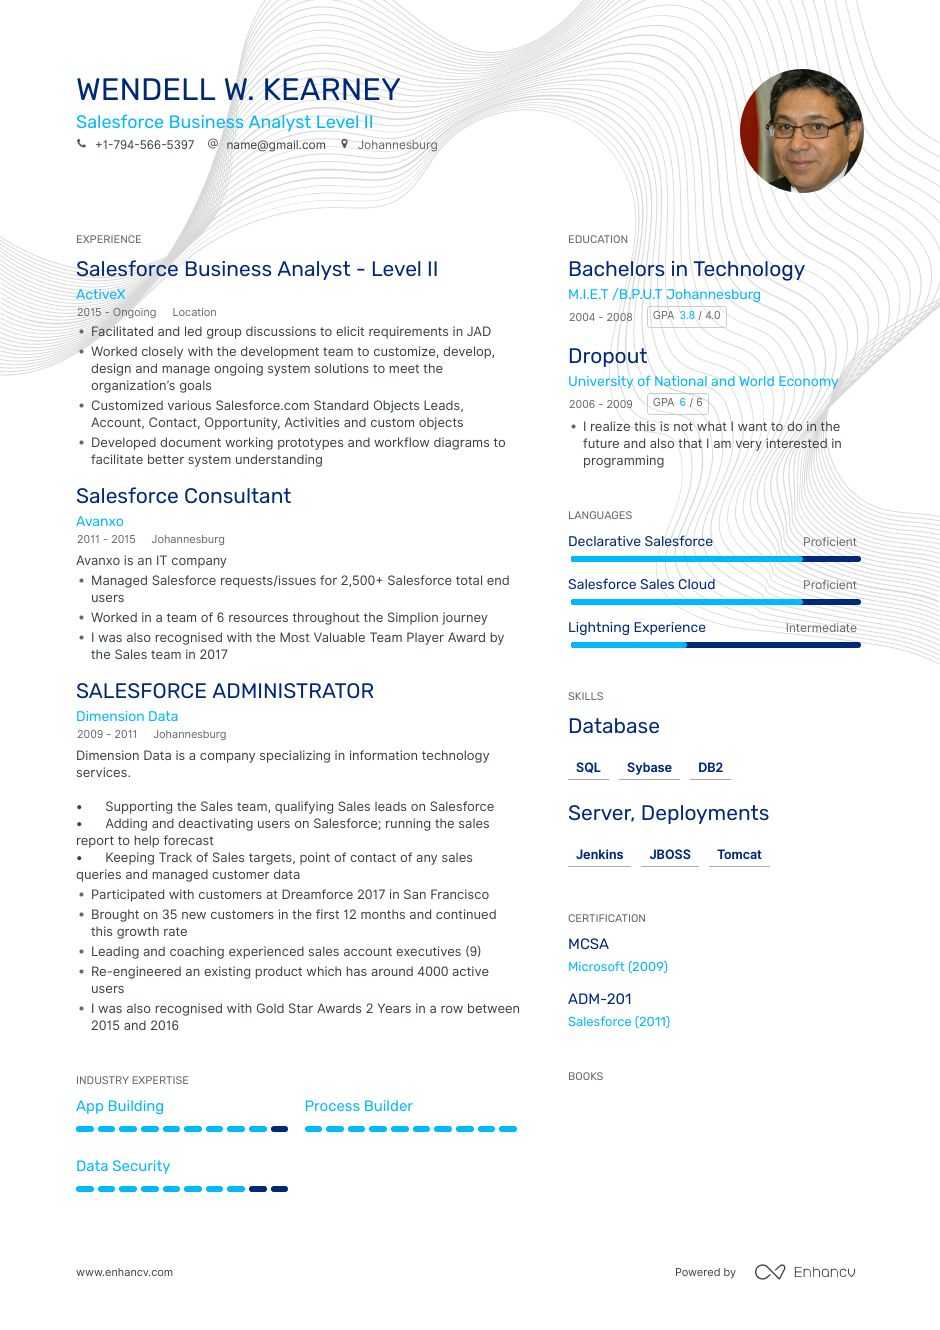 Salesforce Business Analyst resume guide | examples & tips